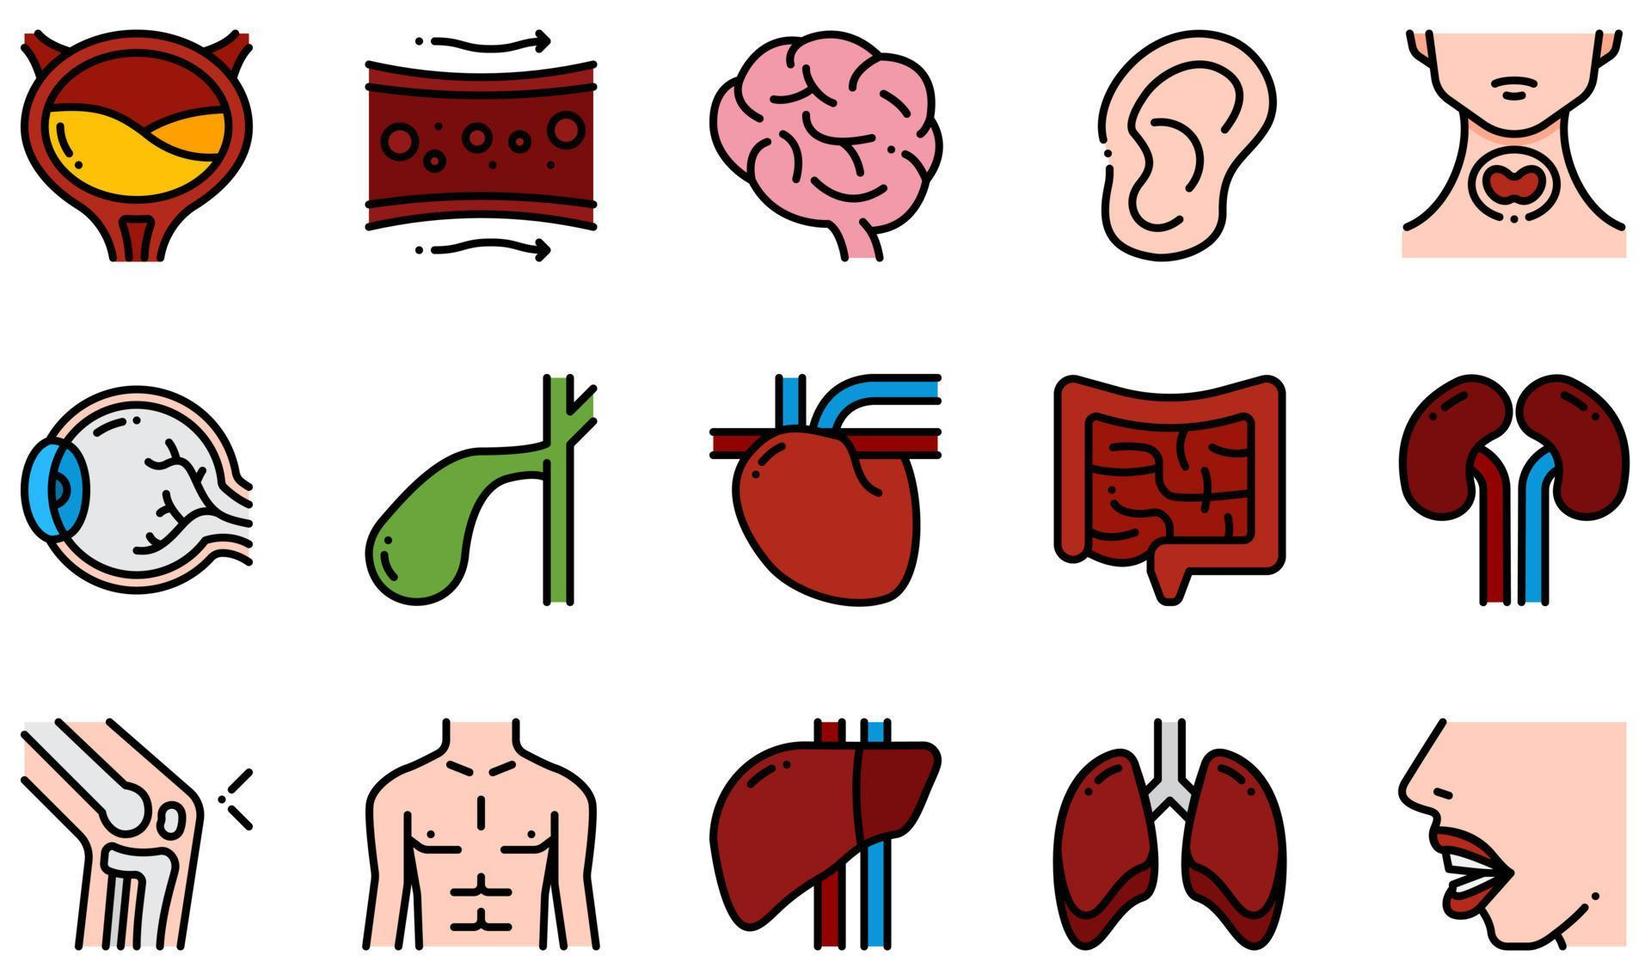 Set of Vector Icons Related to Human Body. Contains such Icons as Bladder, Blood Vessel, Brain, Ear, Eye, Heart and more.